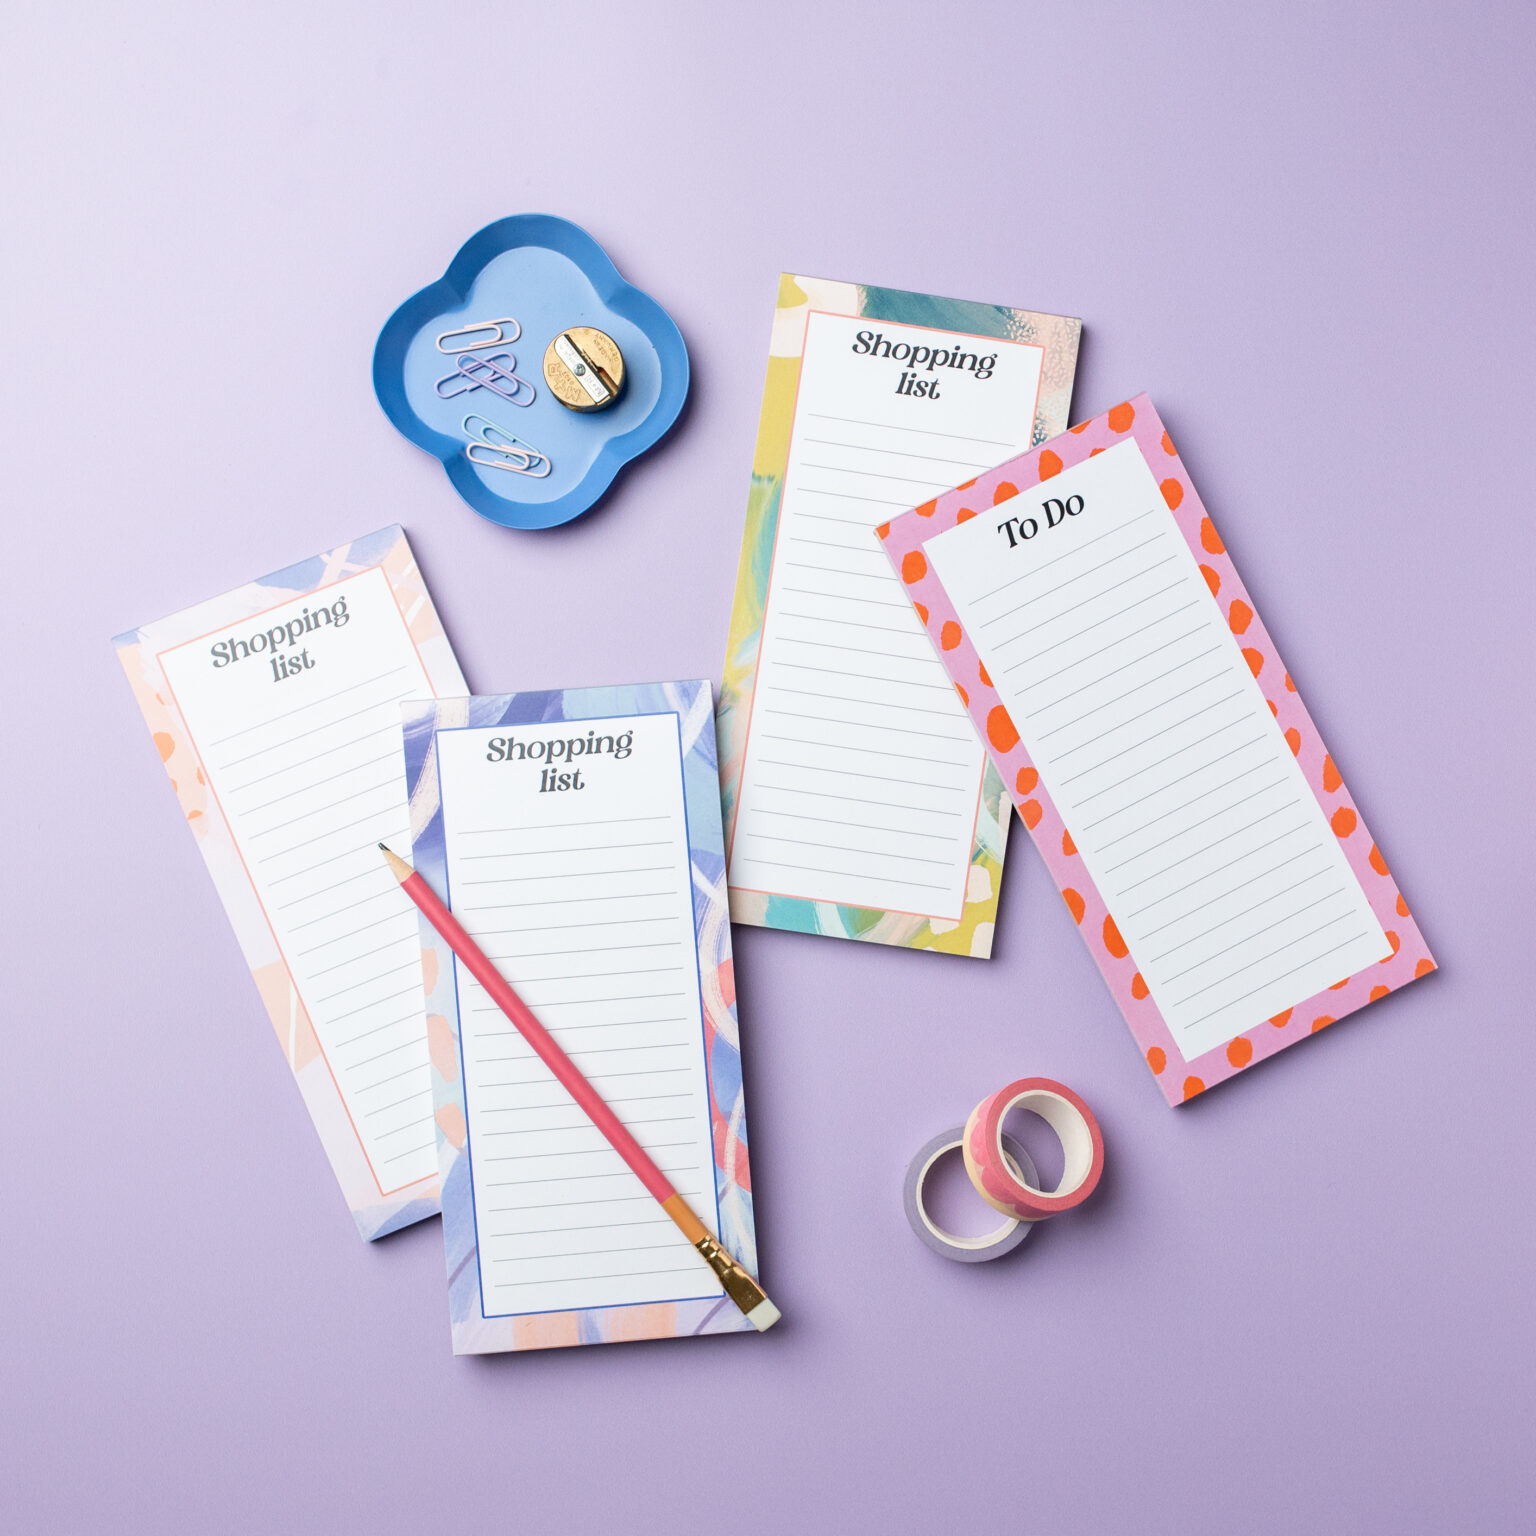 jotter notepads and shopping lists